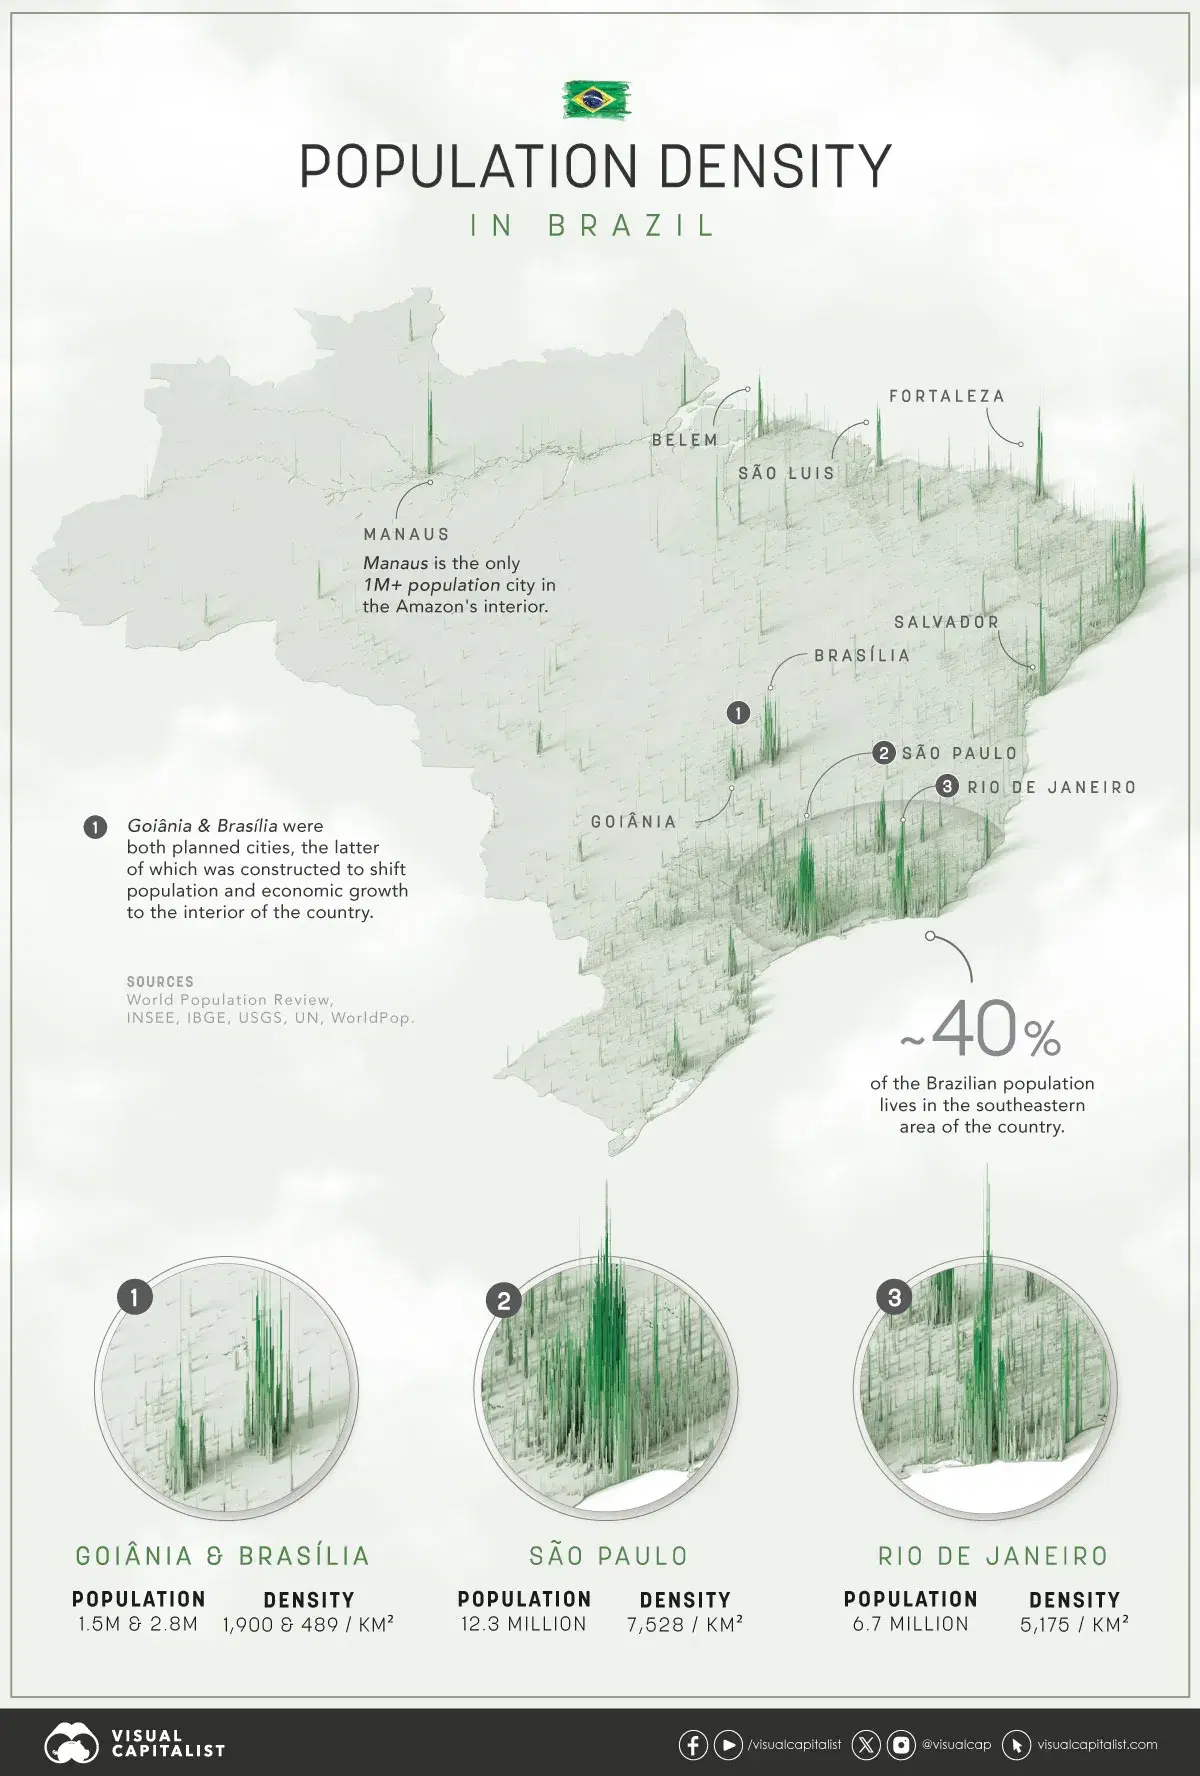 Mapping the Population Density of Brazil